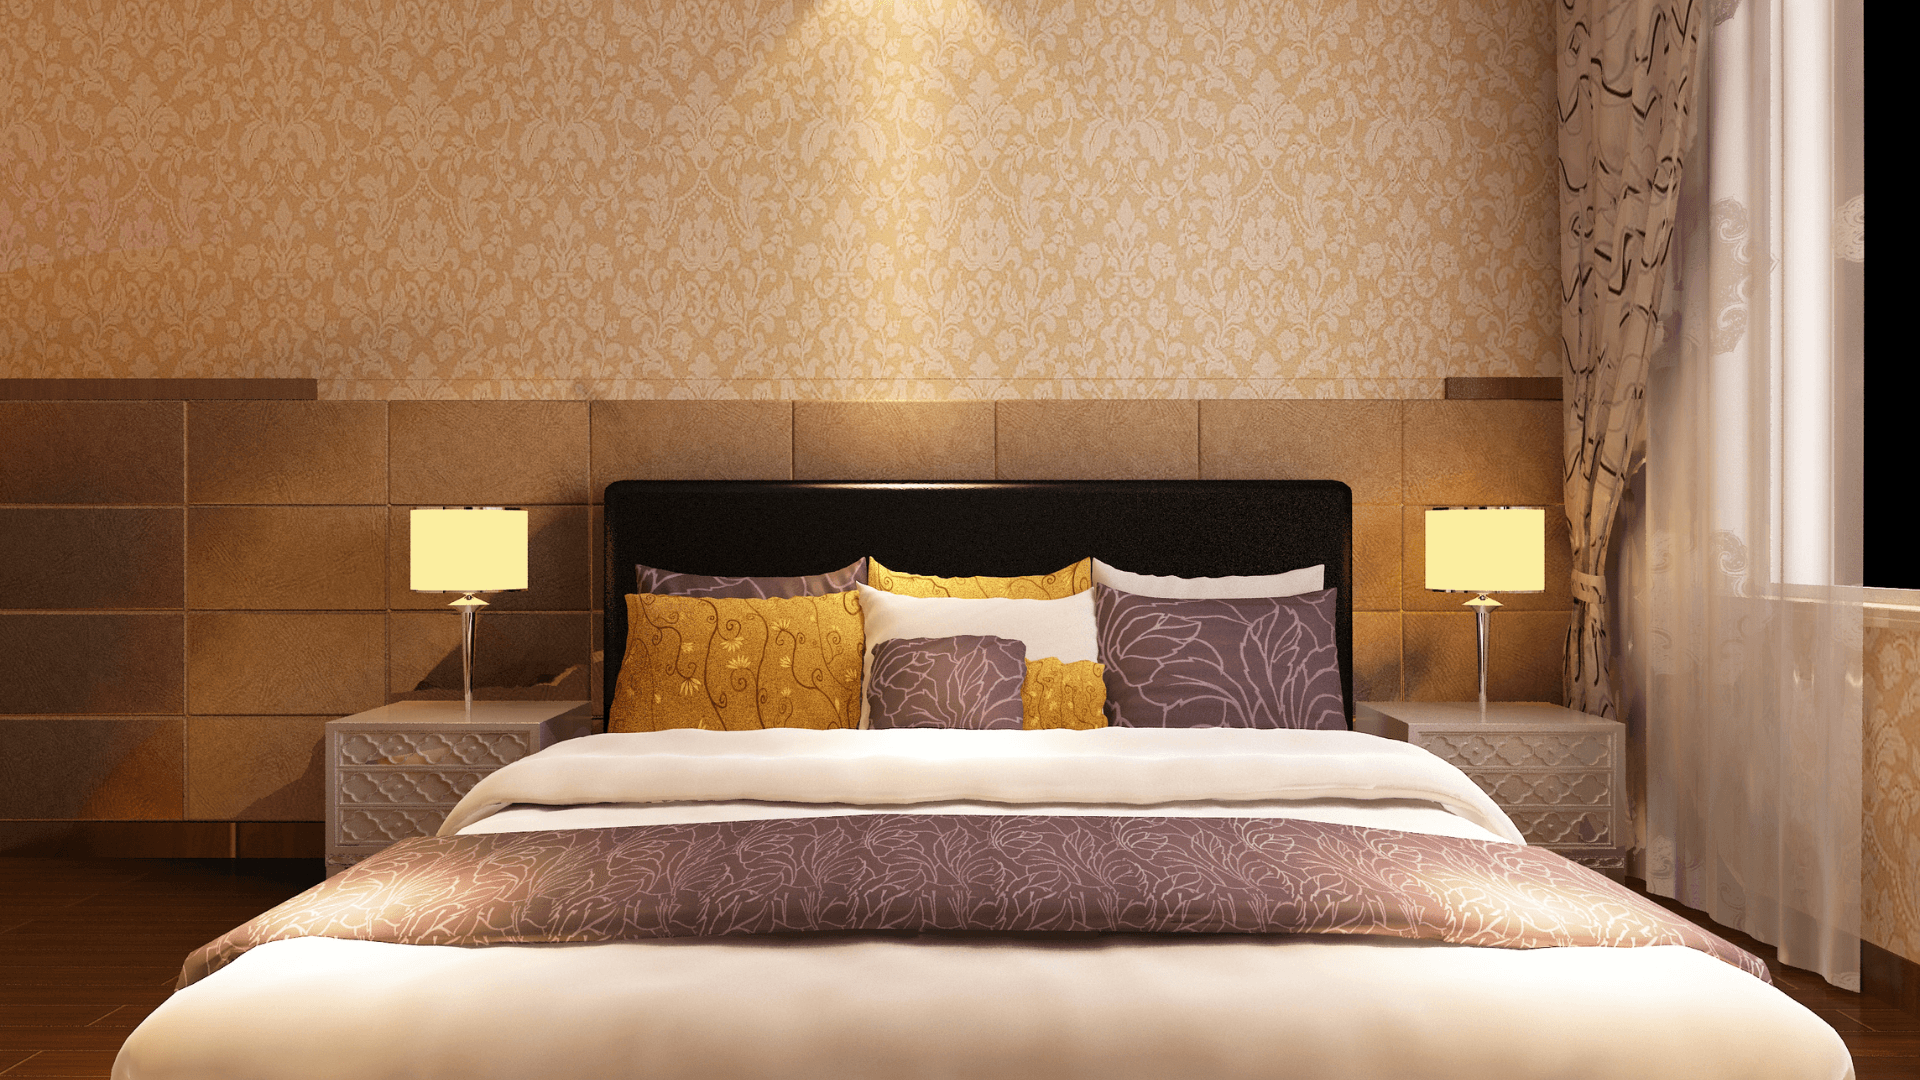 3 Reasons Why a New Bed Can Help You in Business